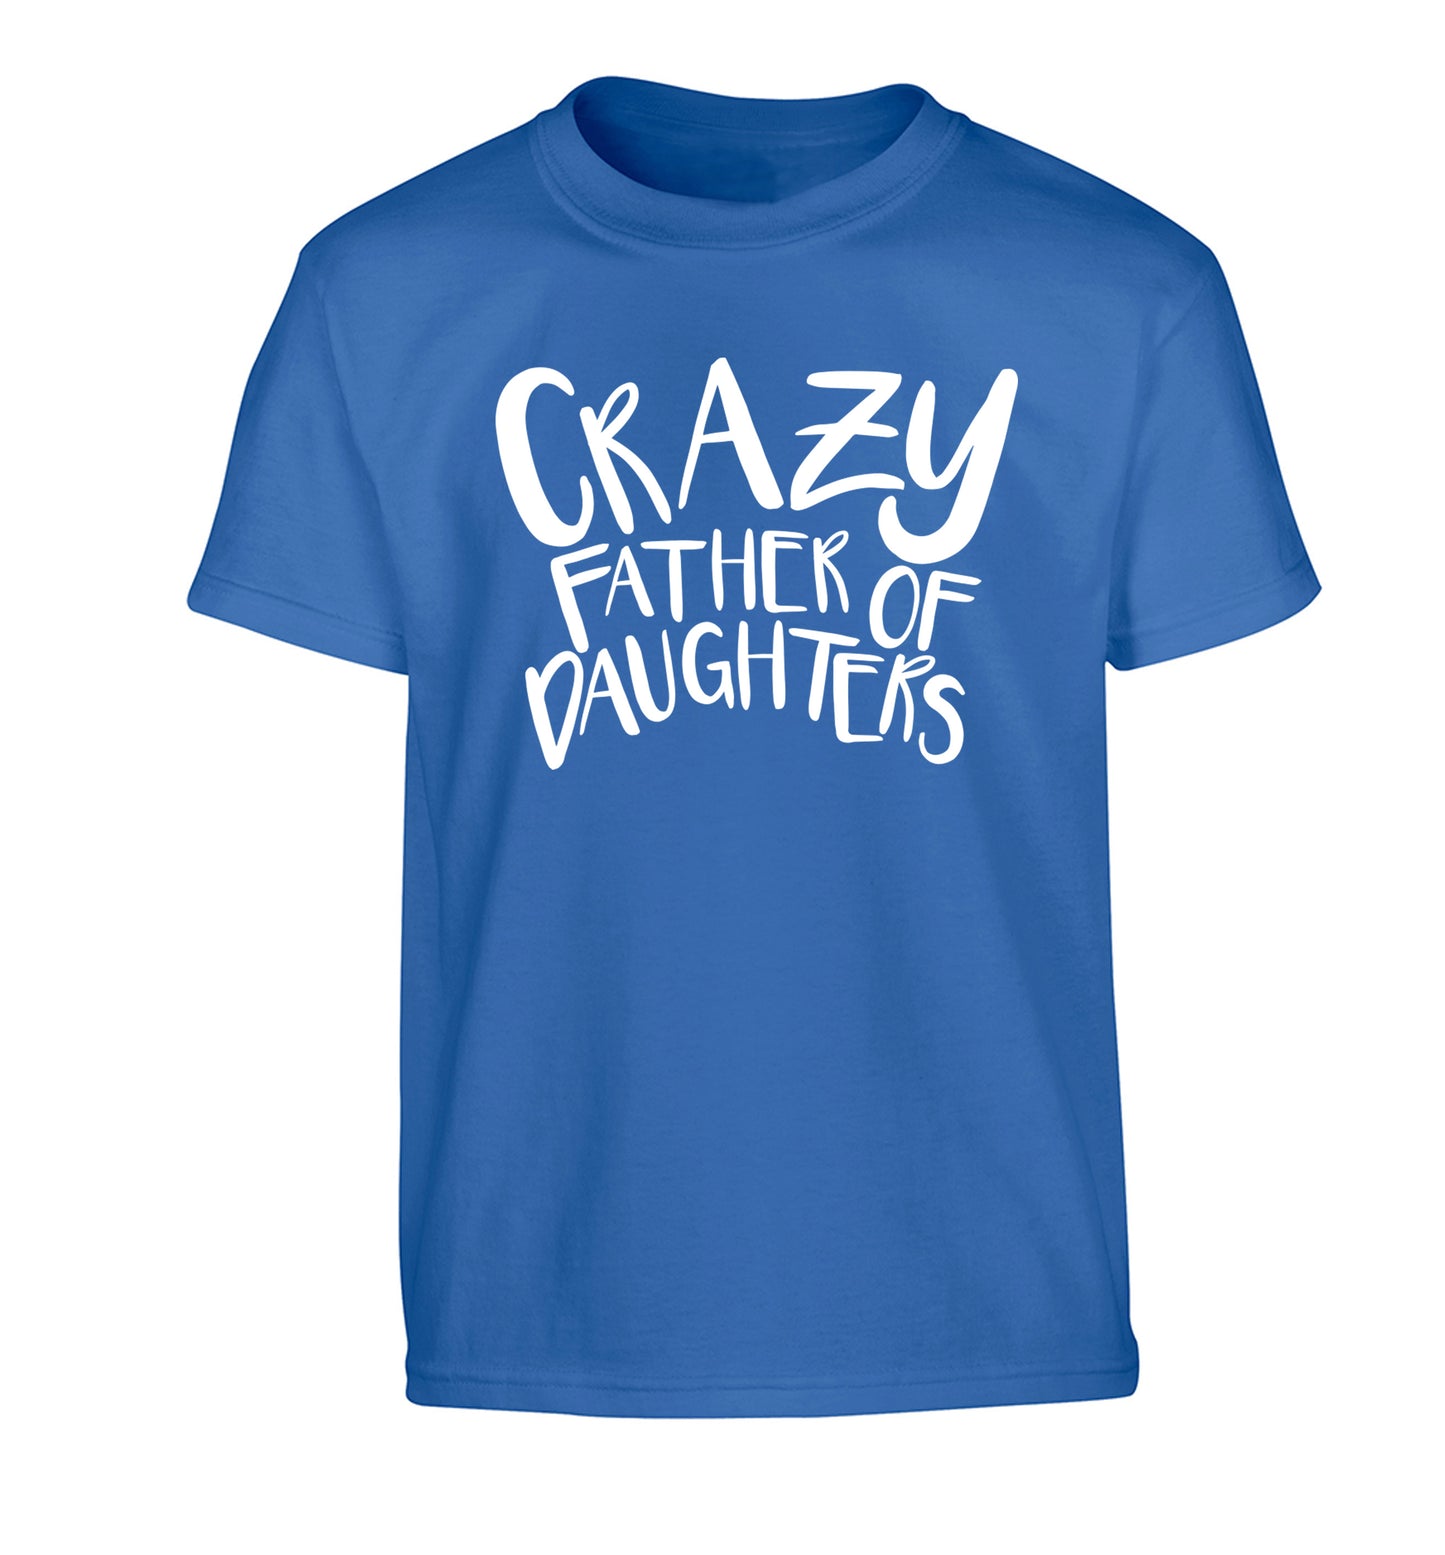 Crazy father of daughters Children's blue Tshirt 12-13 Years